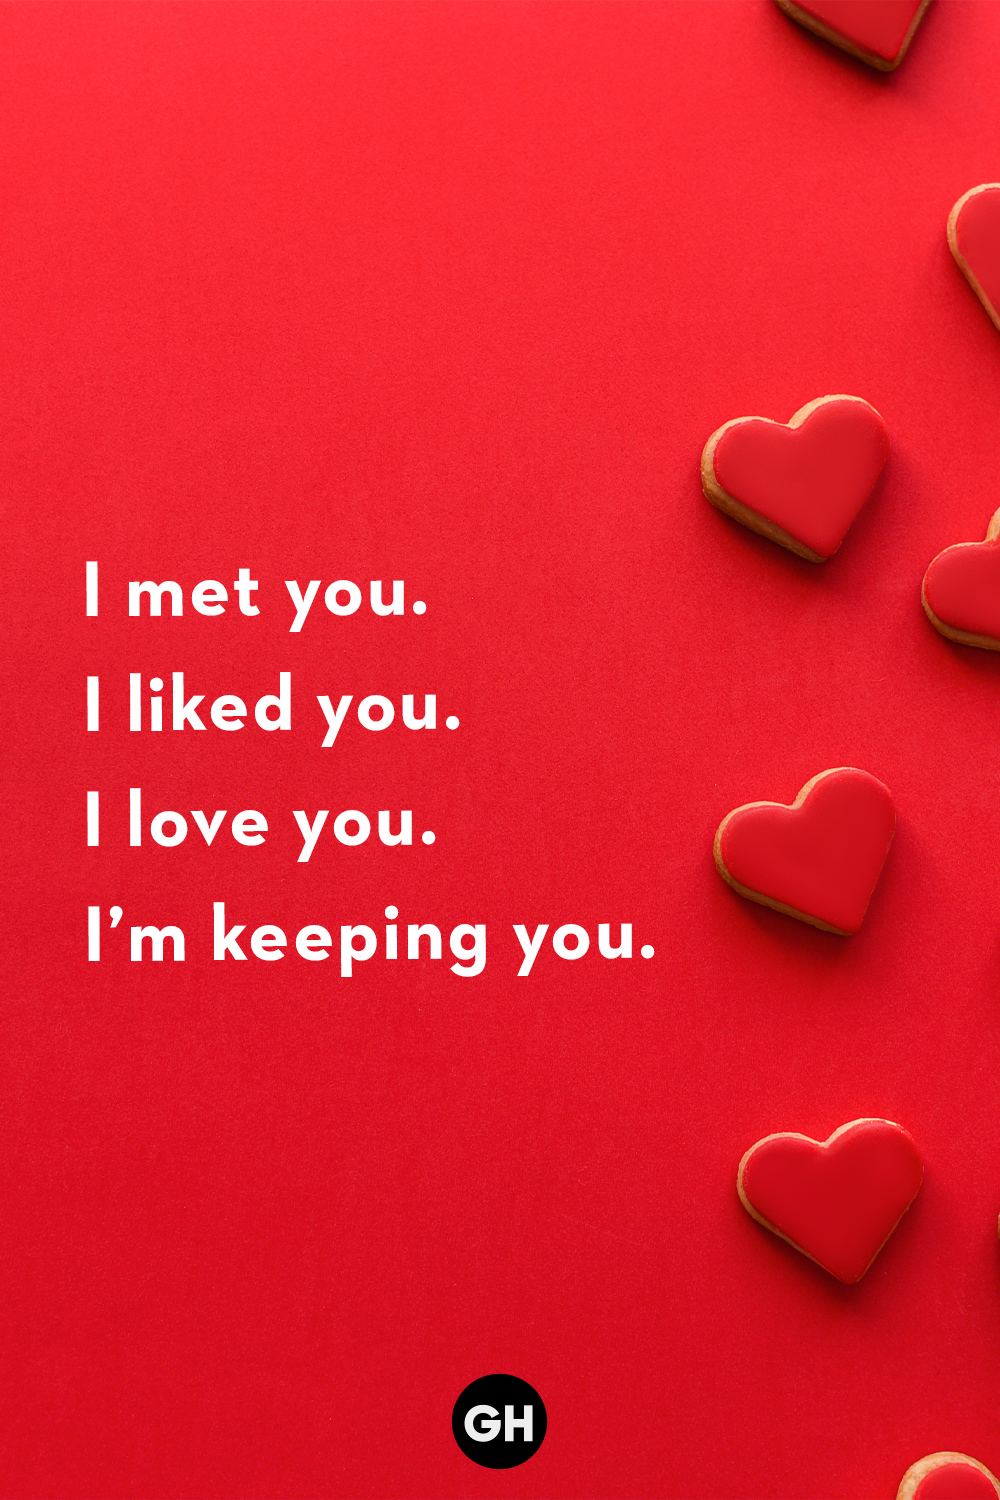 70 Best Valentine's Day Wishes and Messages to Write in a Card